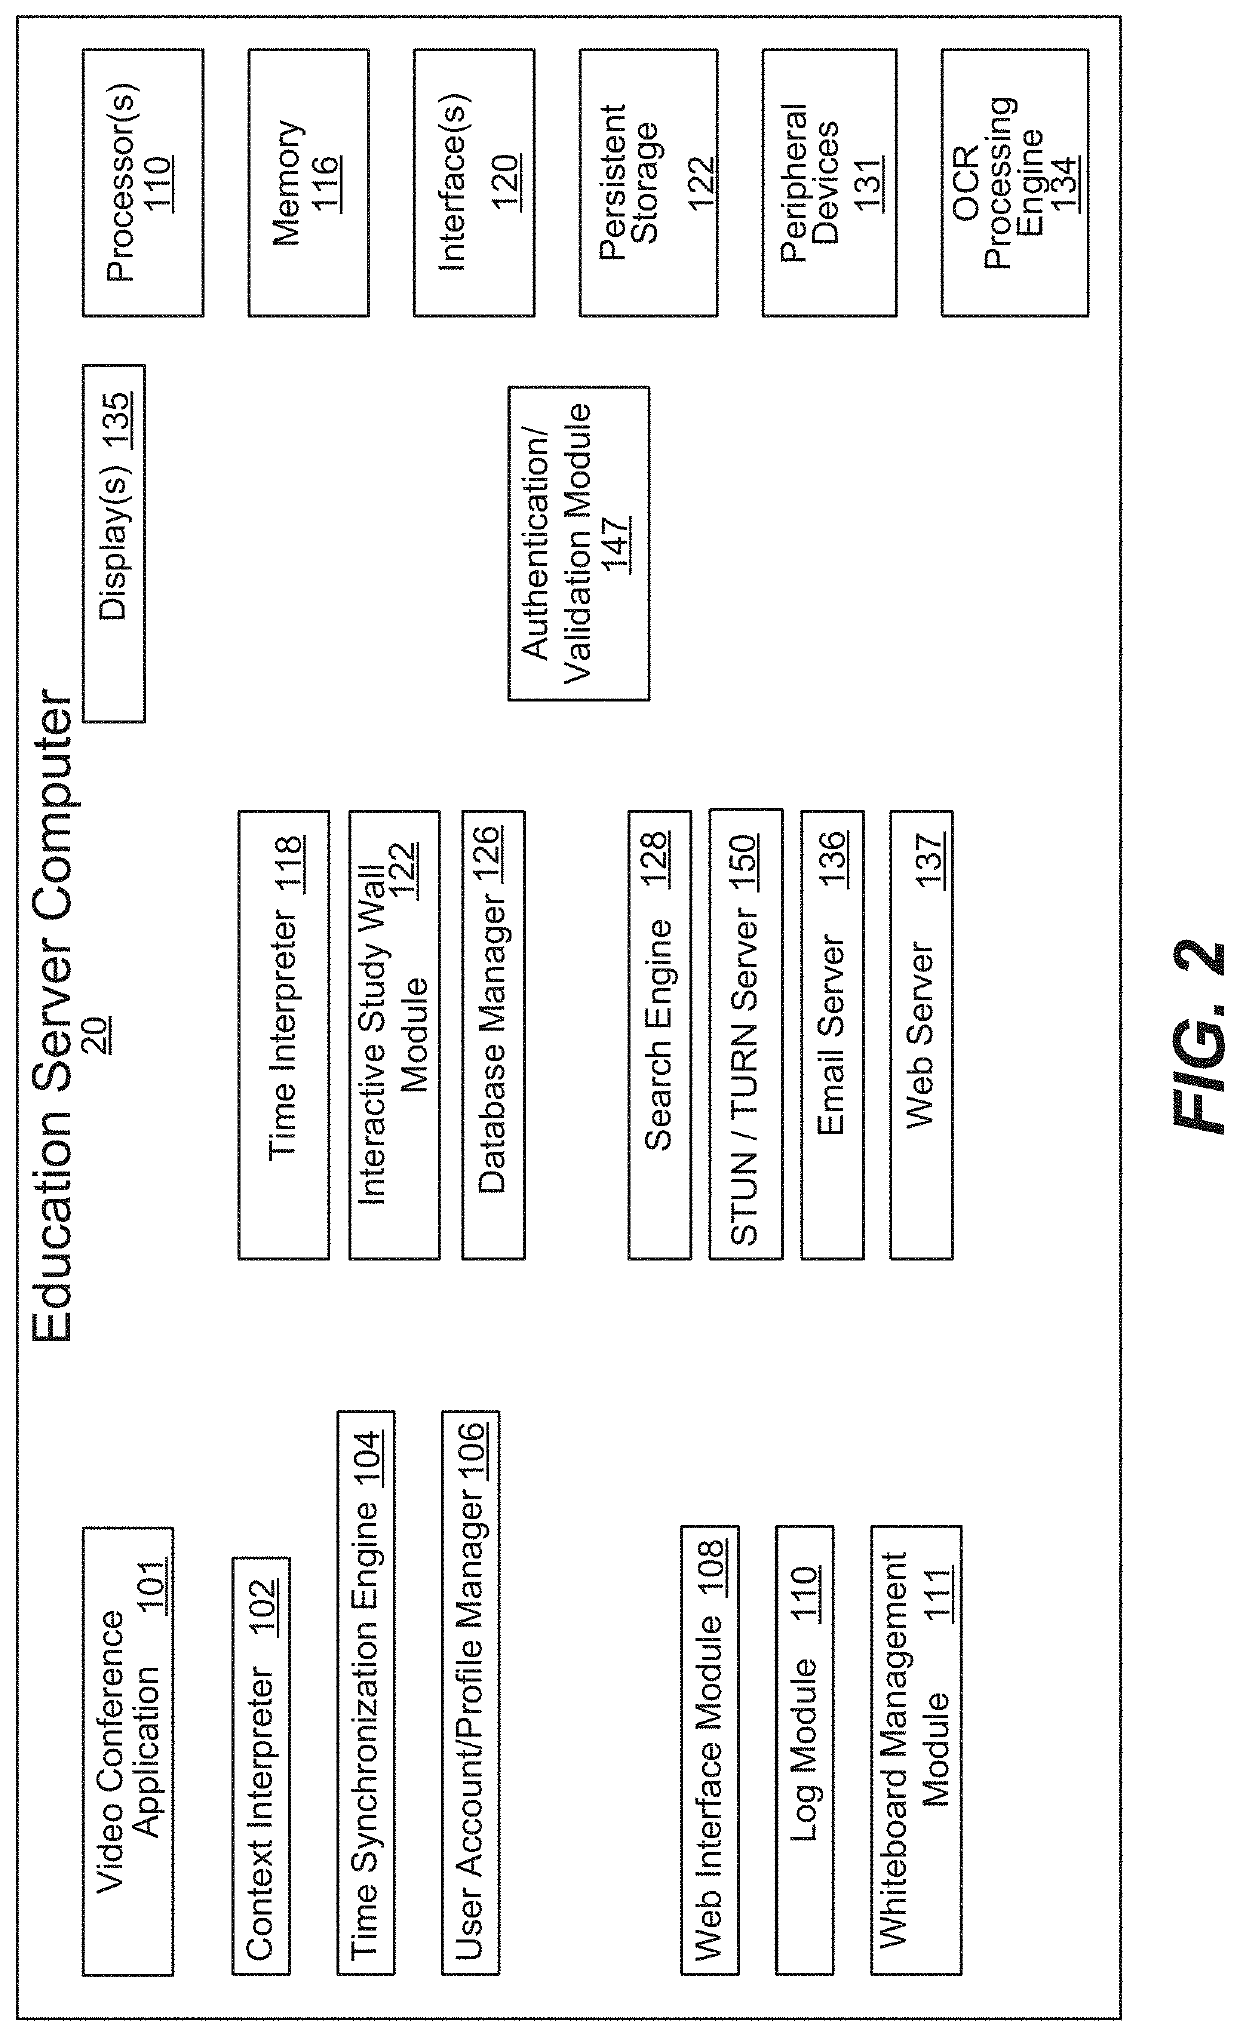 Storage and retrieval of virtual reality sessions state based upon participants